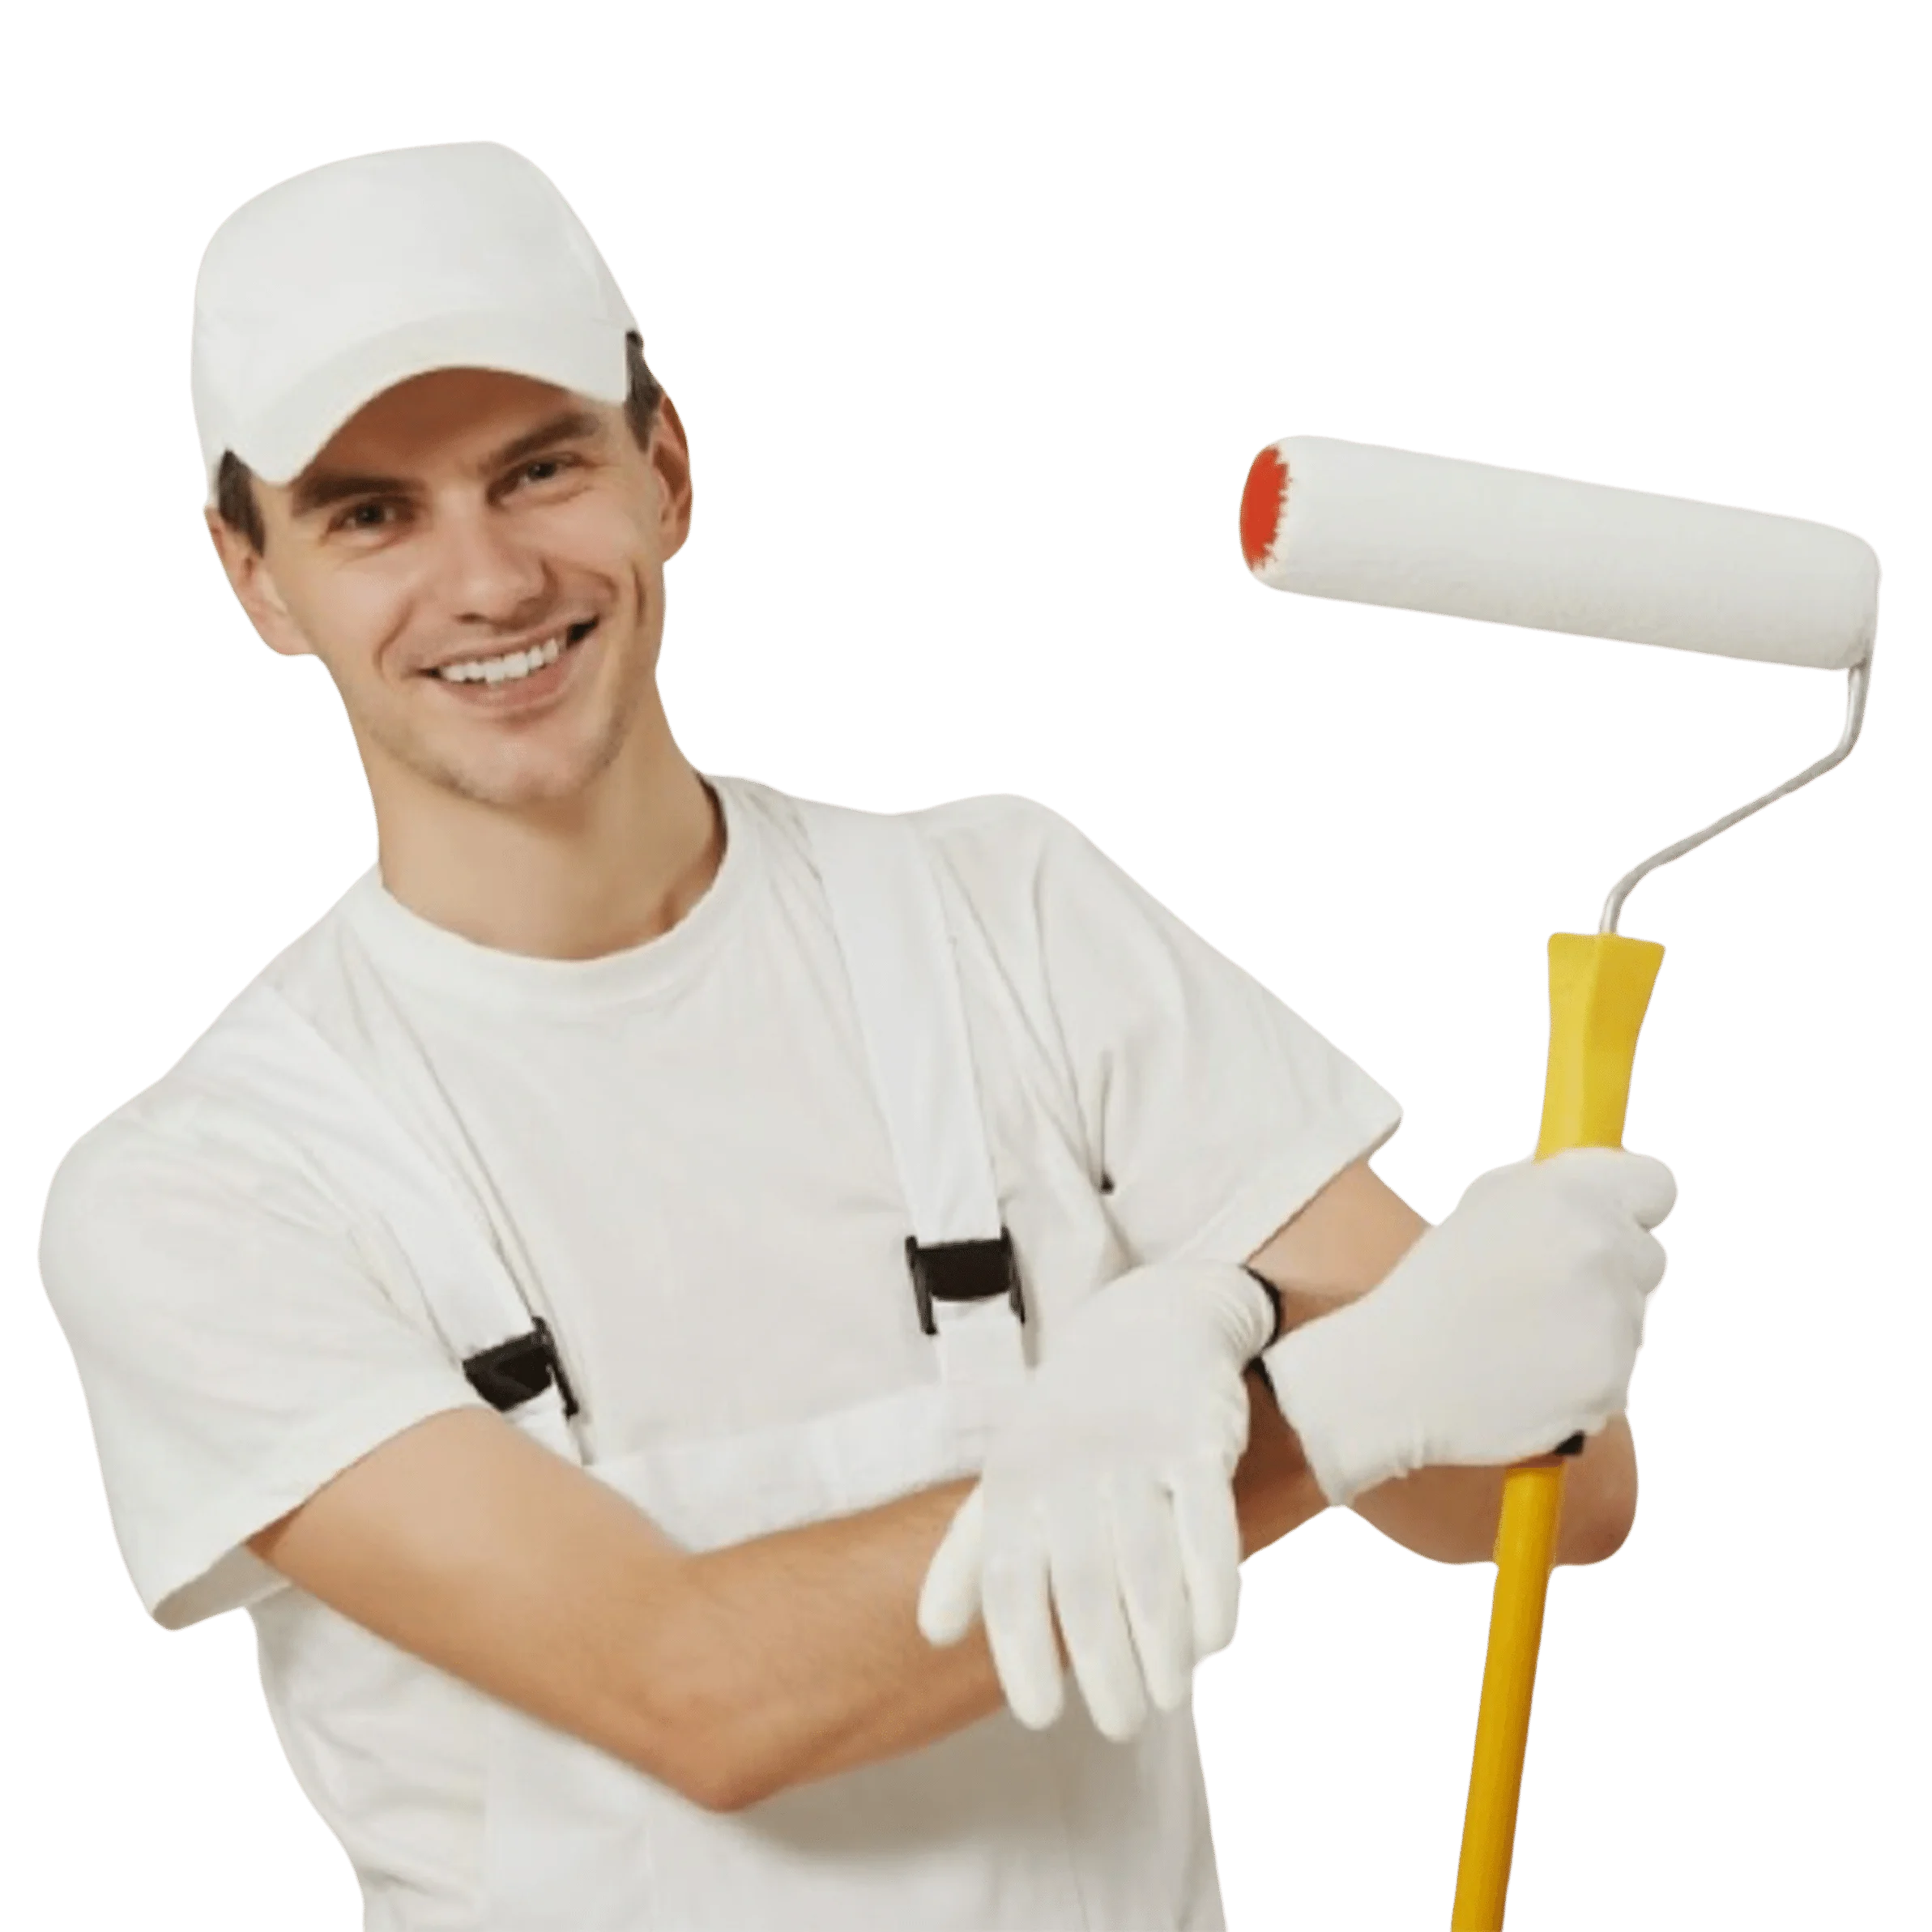 Normal paiting services in dubai